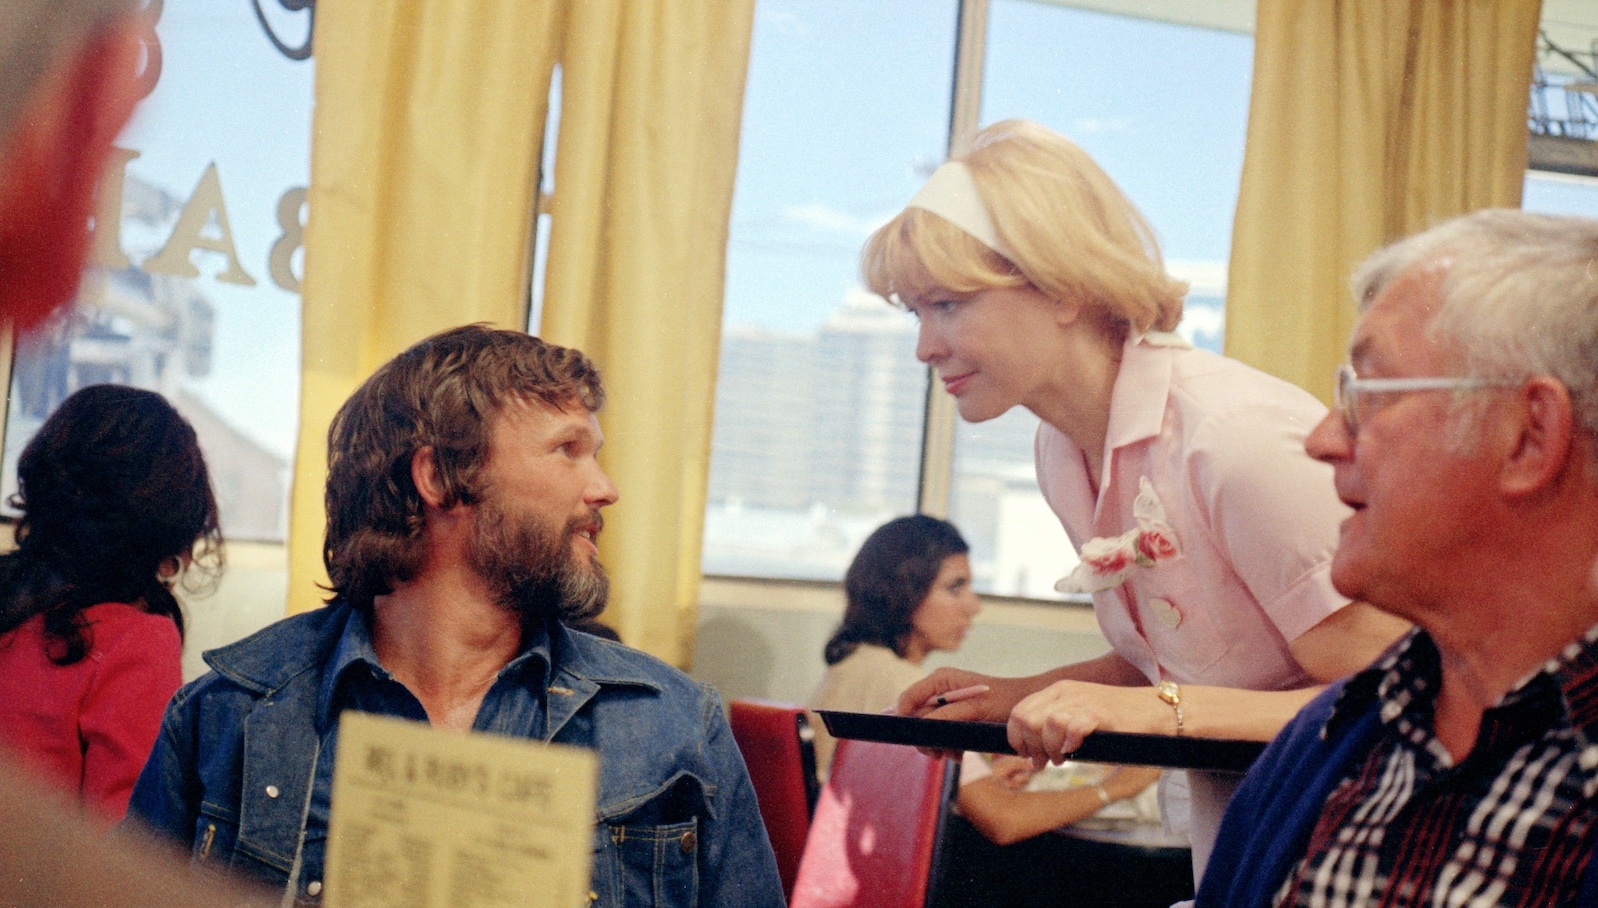 A waitress in a diner and pink shirt bends over to talk to a customer in a denim shirt